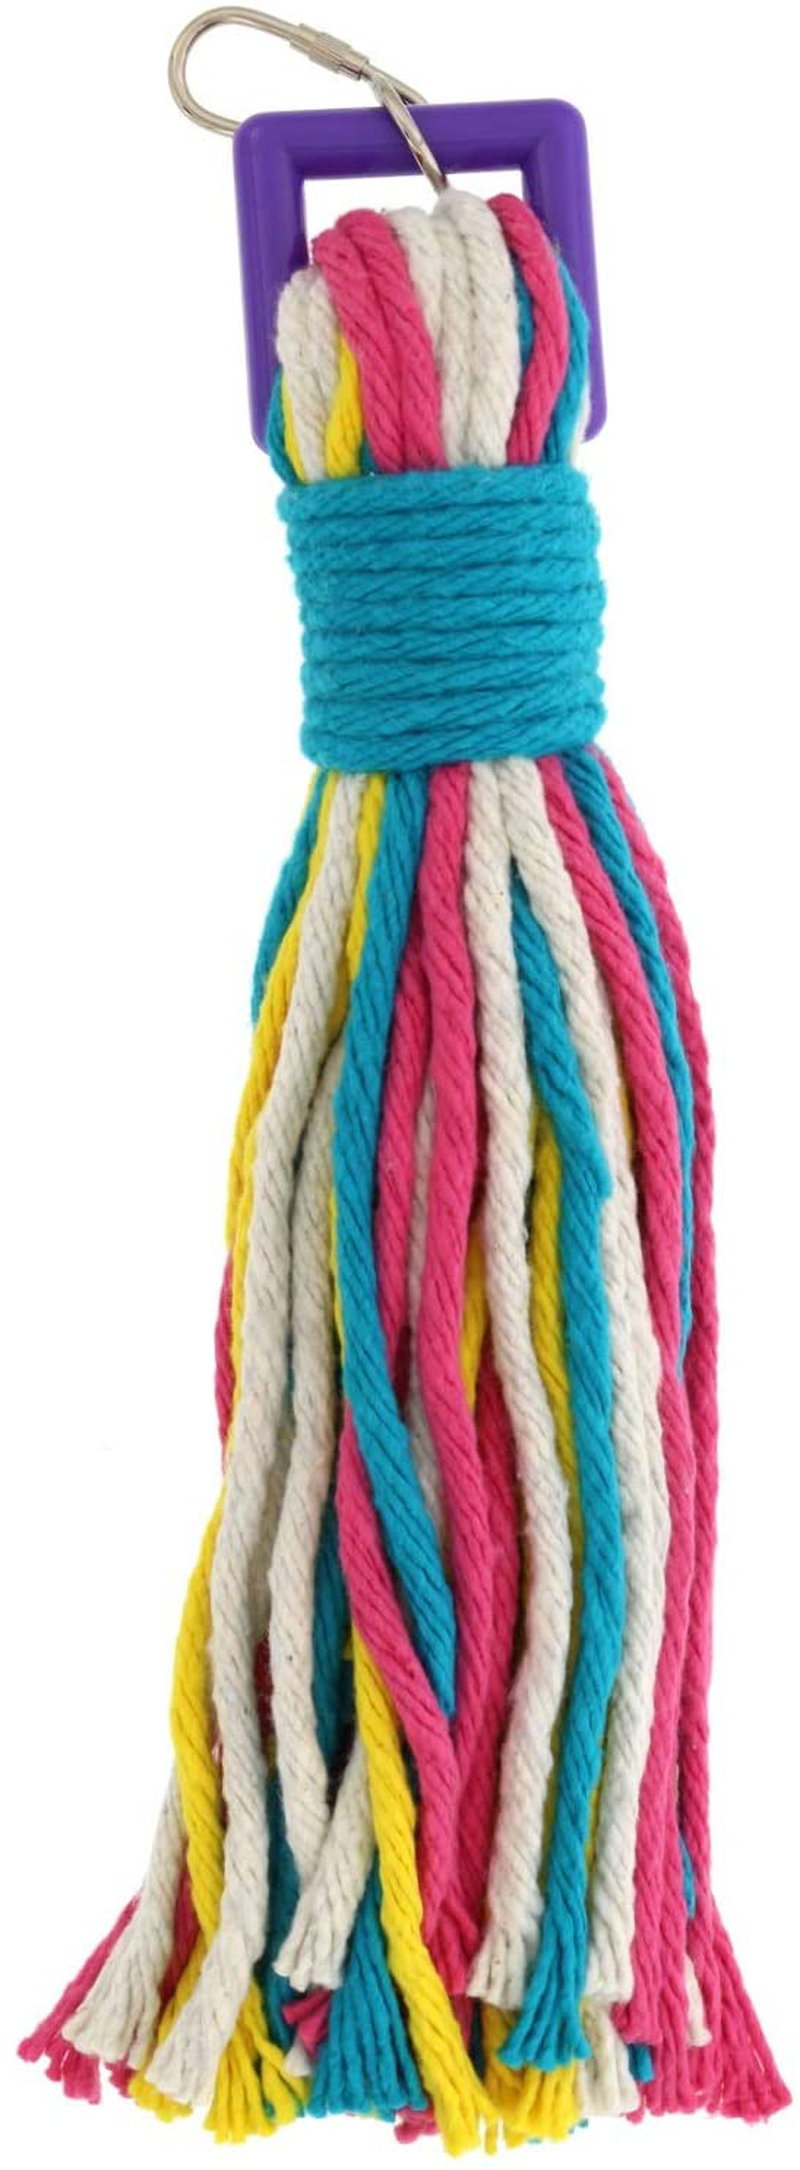 Sweet Feet and Beak Platinum Tweeter Weave Bird Toys - Perfect Cage Toy for Playing & Preening - Colorful, Safe, Cotton Rope - Birds Cage Playground Accessories & Supplies - Parrot Toys (Large)